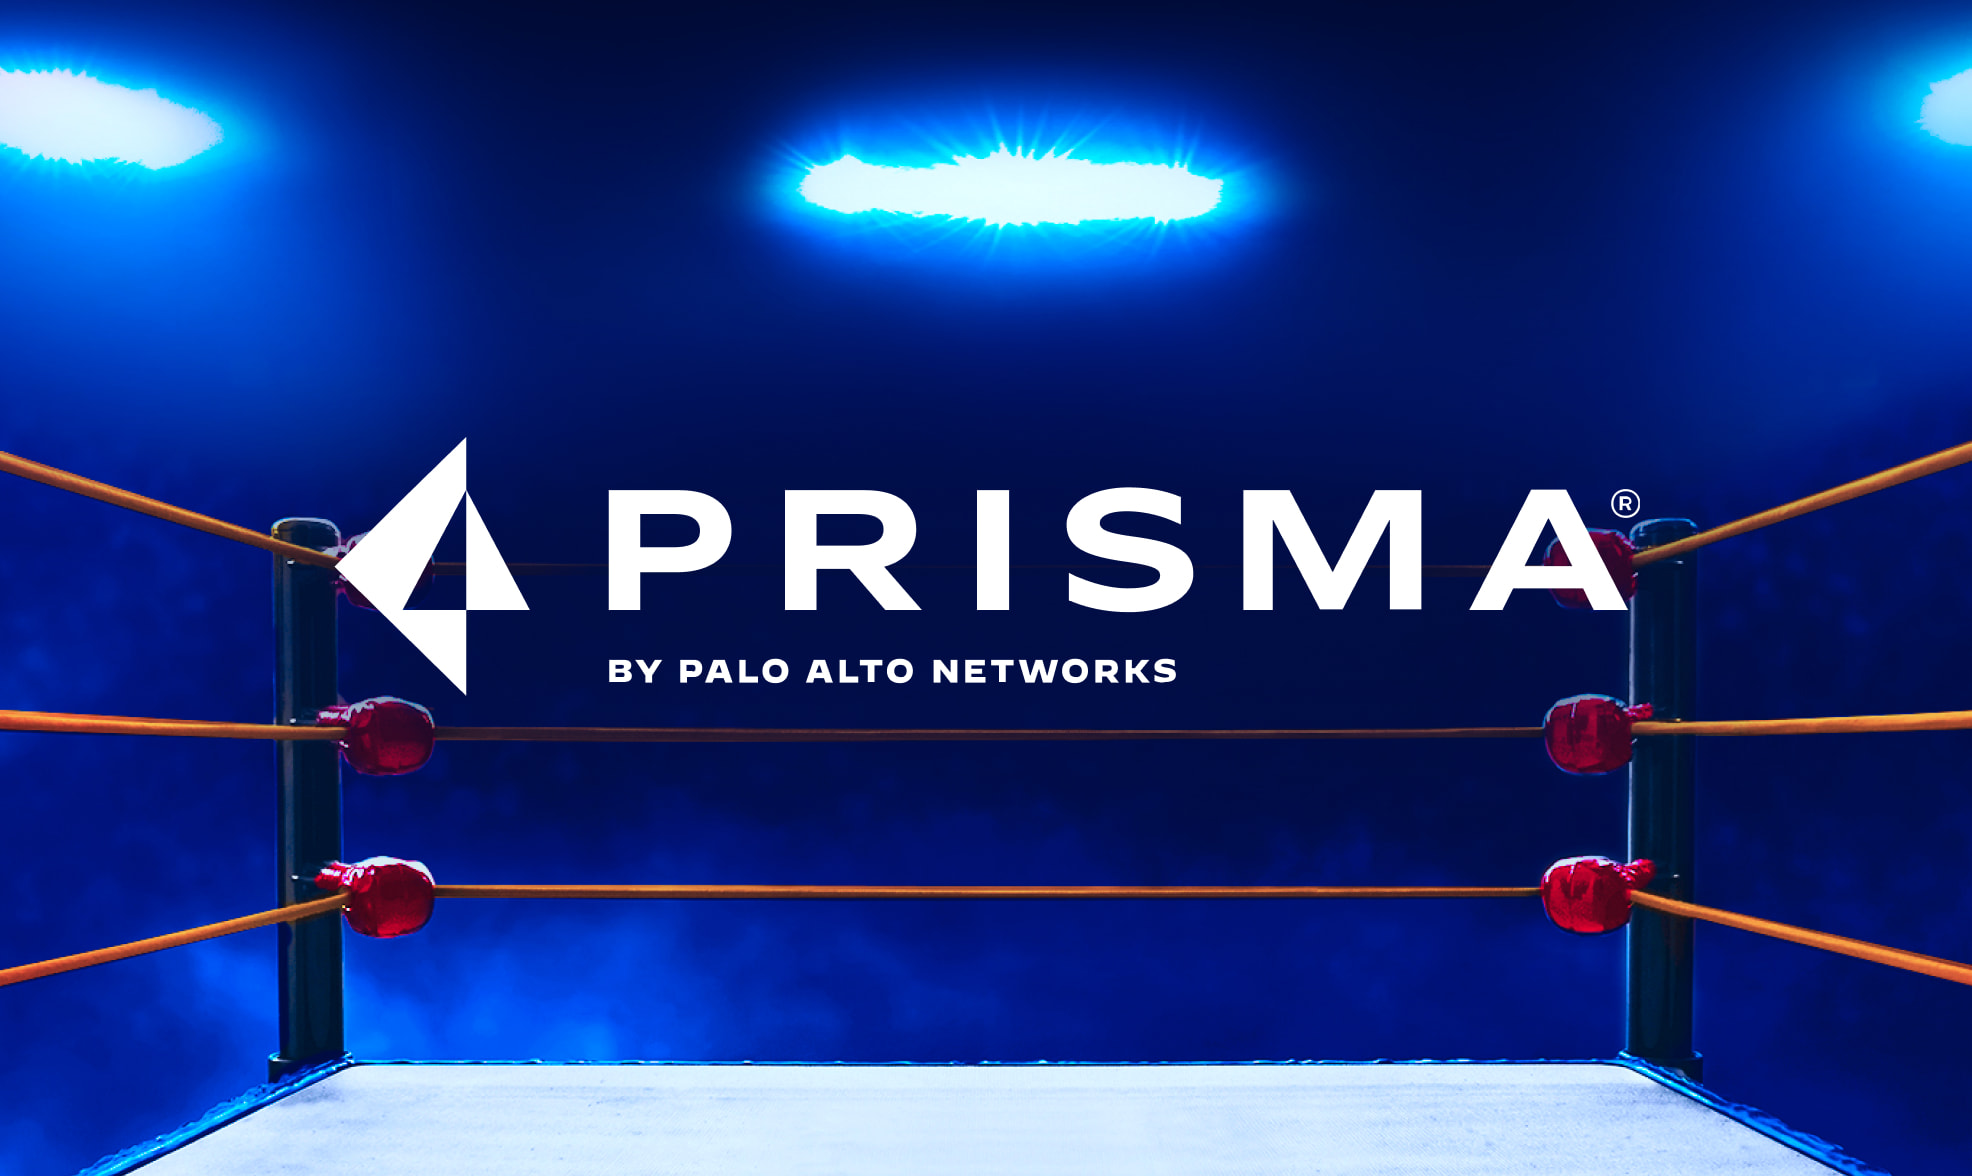 Prisma always has something new to offer its consumers. Get the